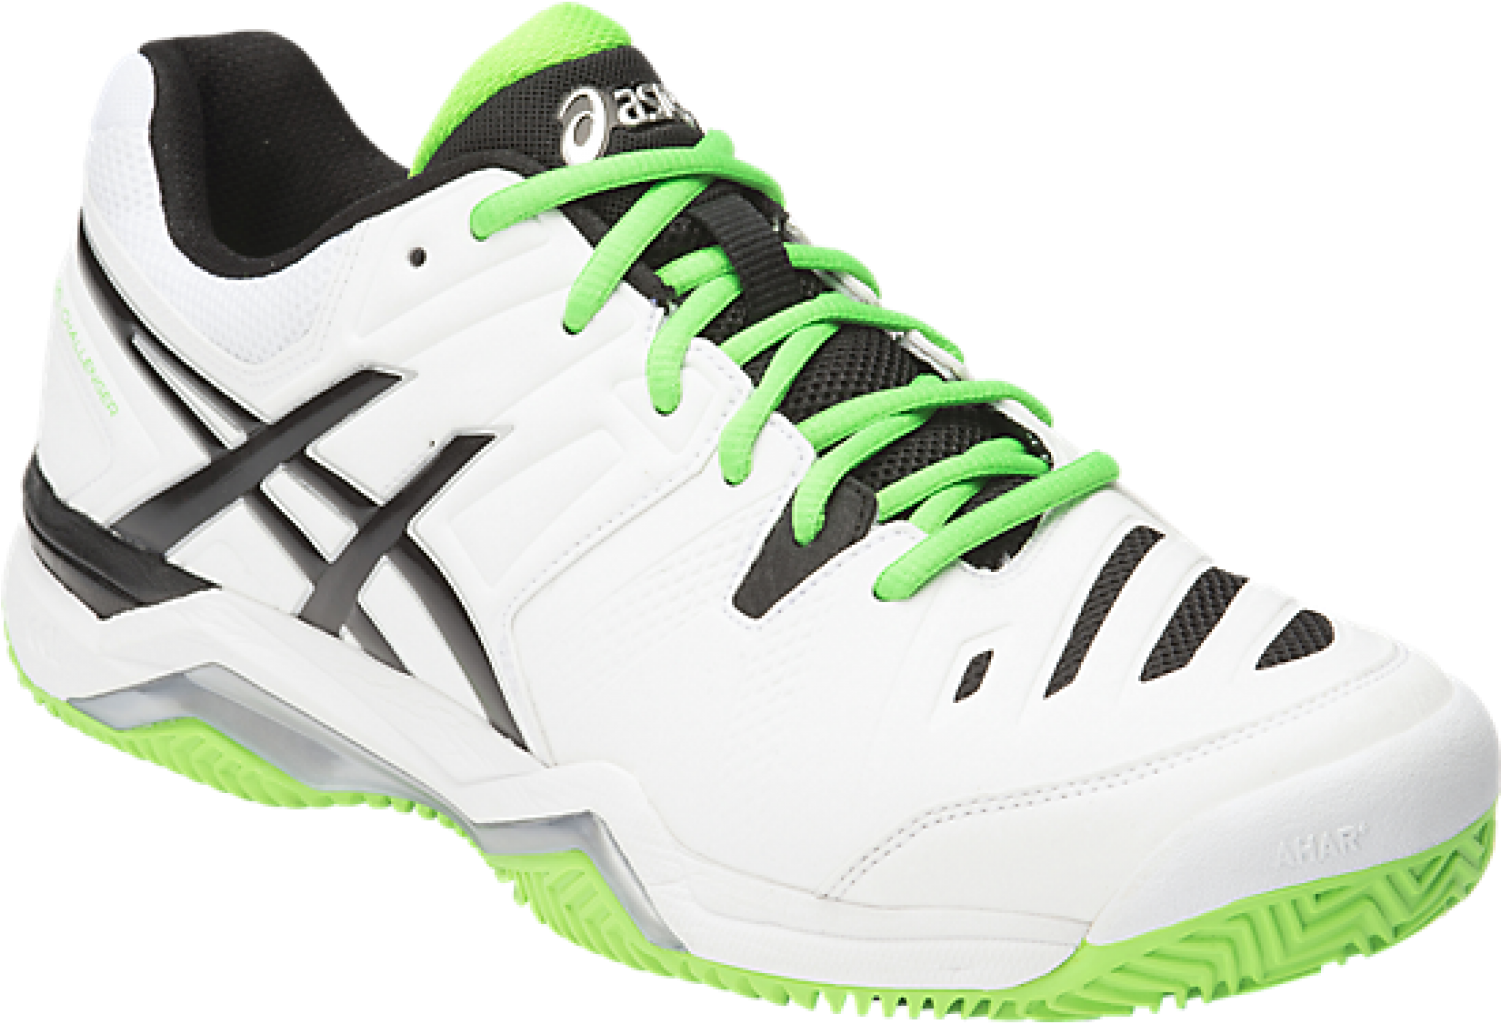 Asics Challenger 10 Clay E505y-0193 White/silver/green/black - Asics Shoes Tennis Black And White (1500x1500), Png Download